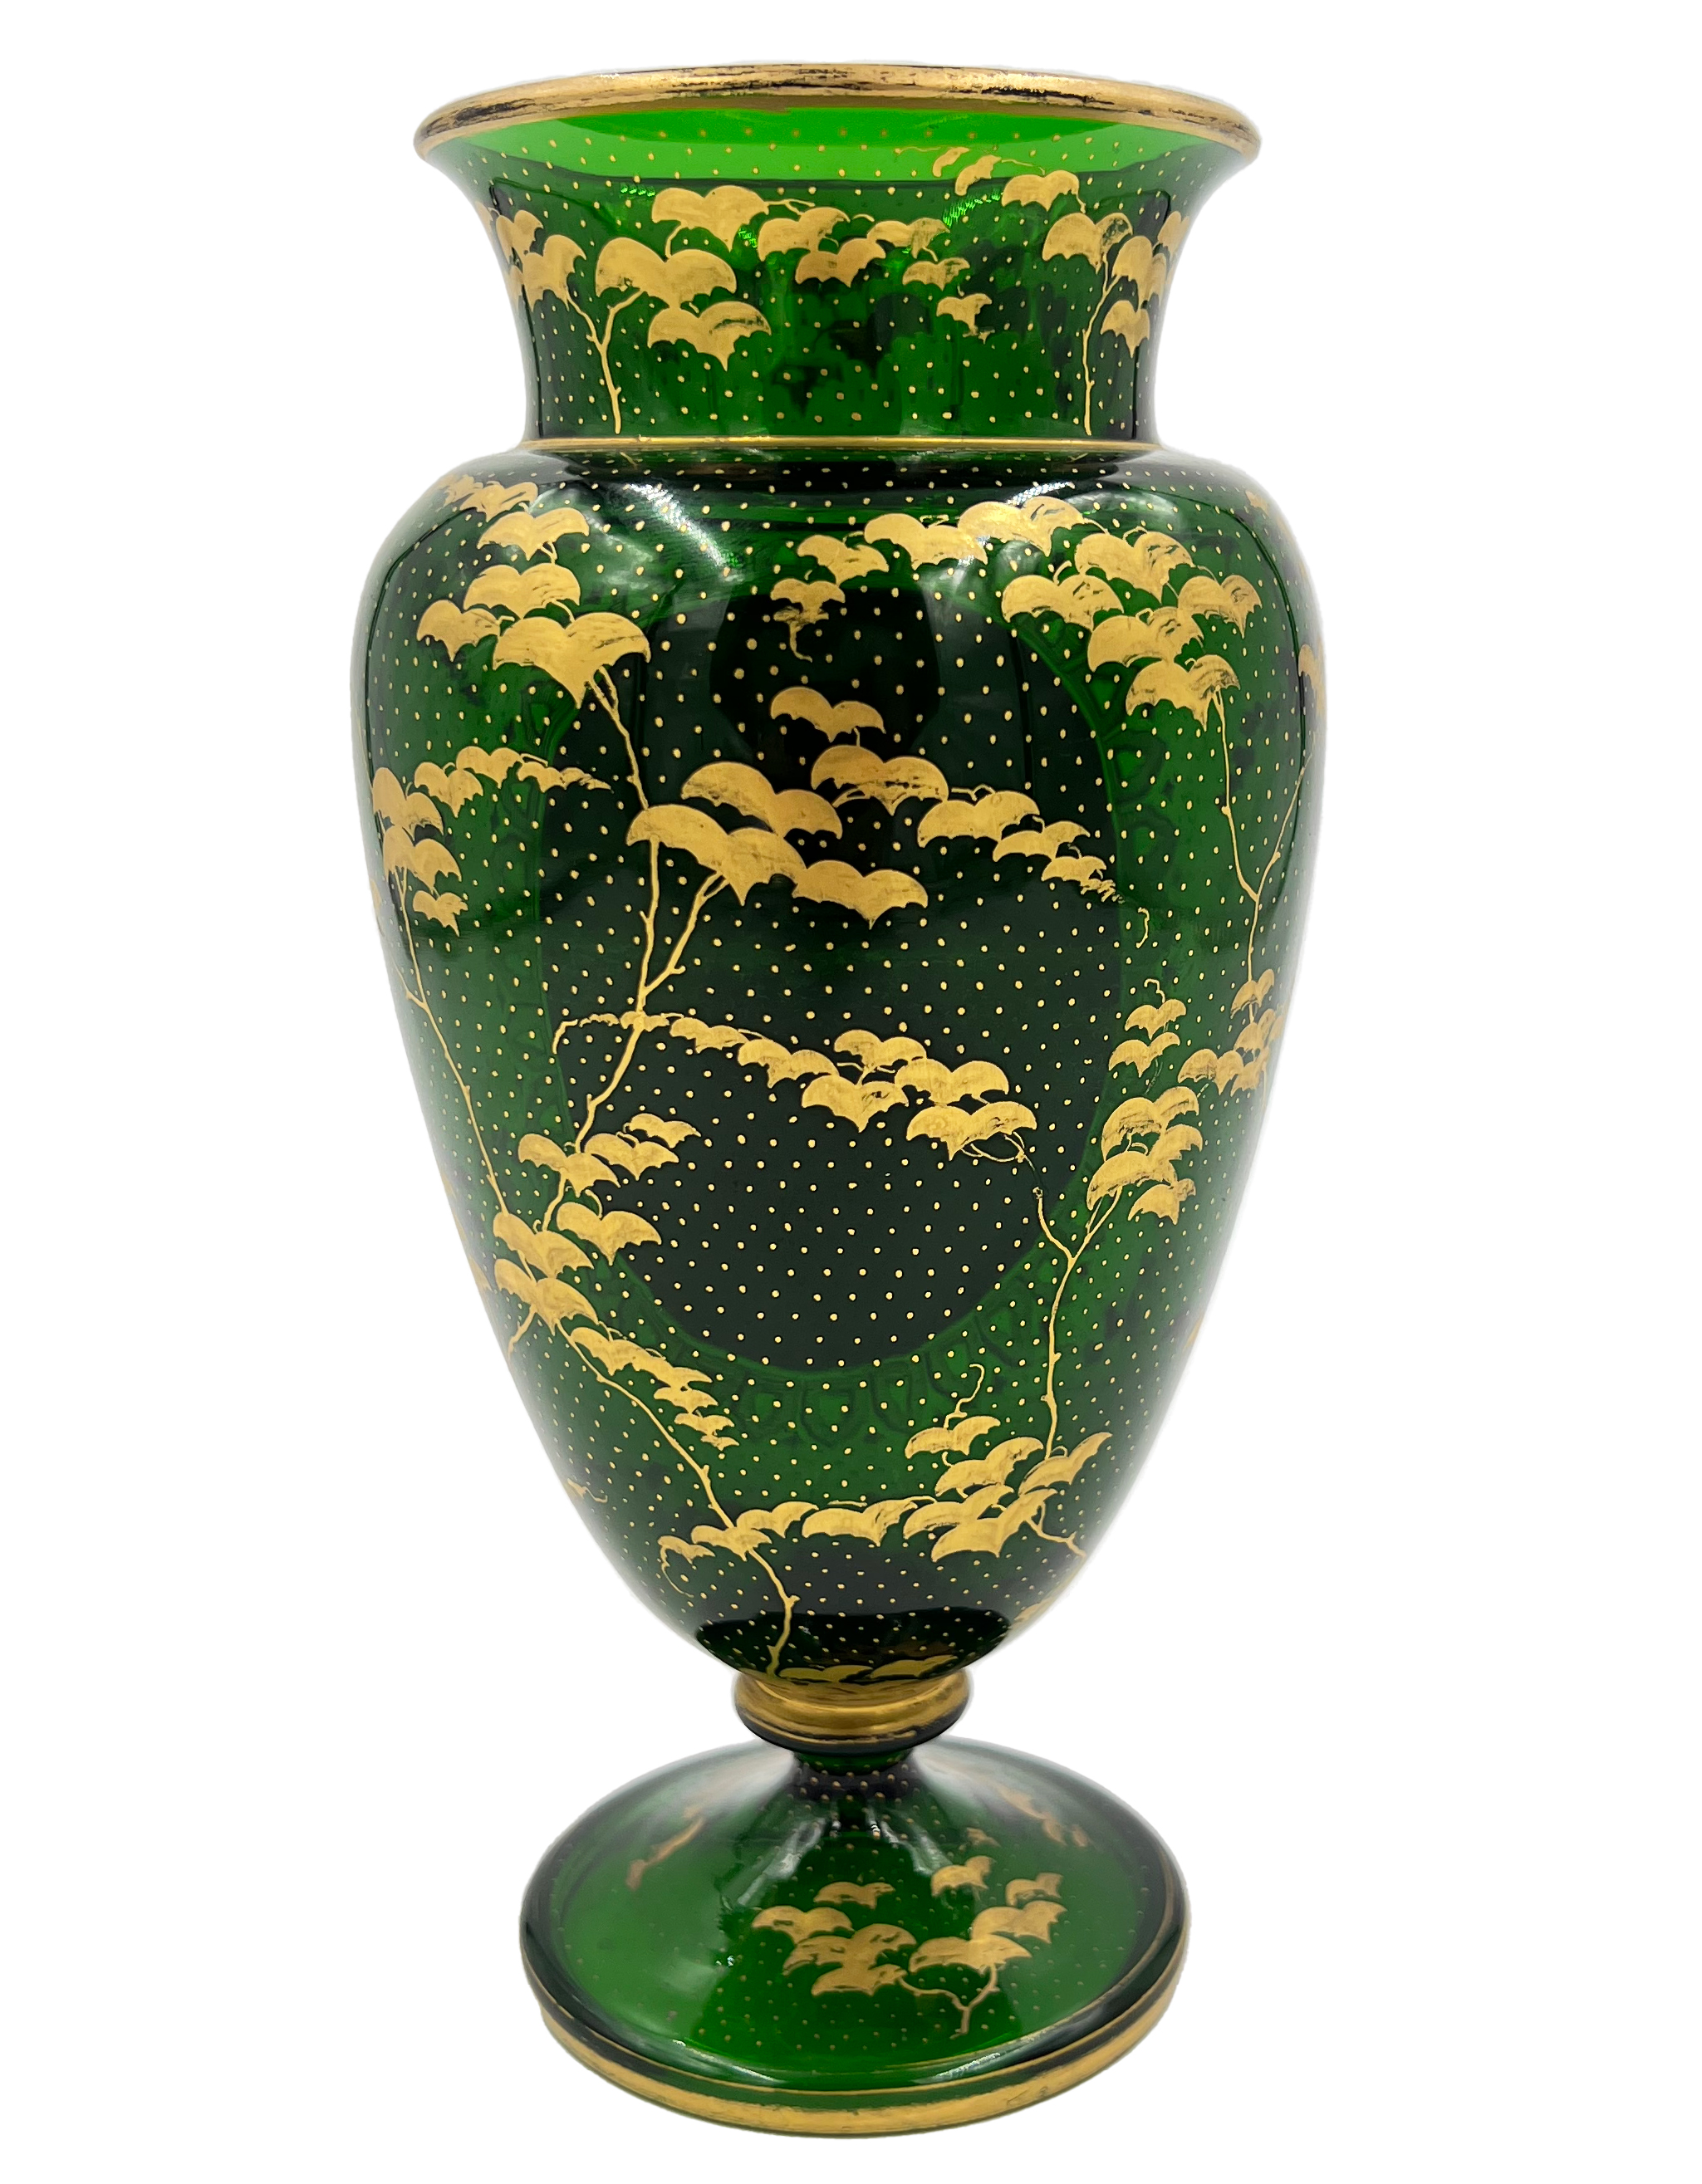 19TH CENTURY BOHEMIAN GLASS VASE WITH GOLD GILDING - Image 2 of 3